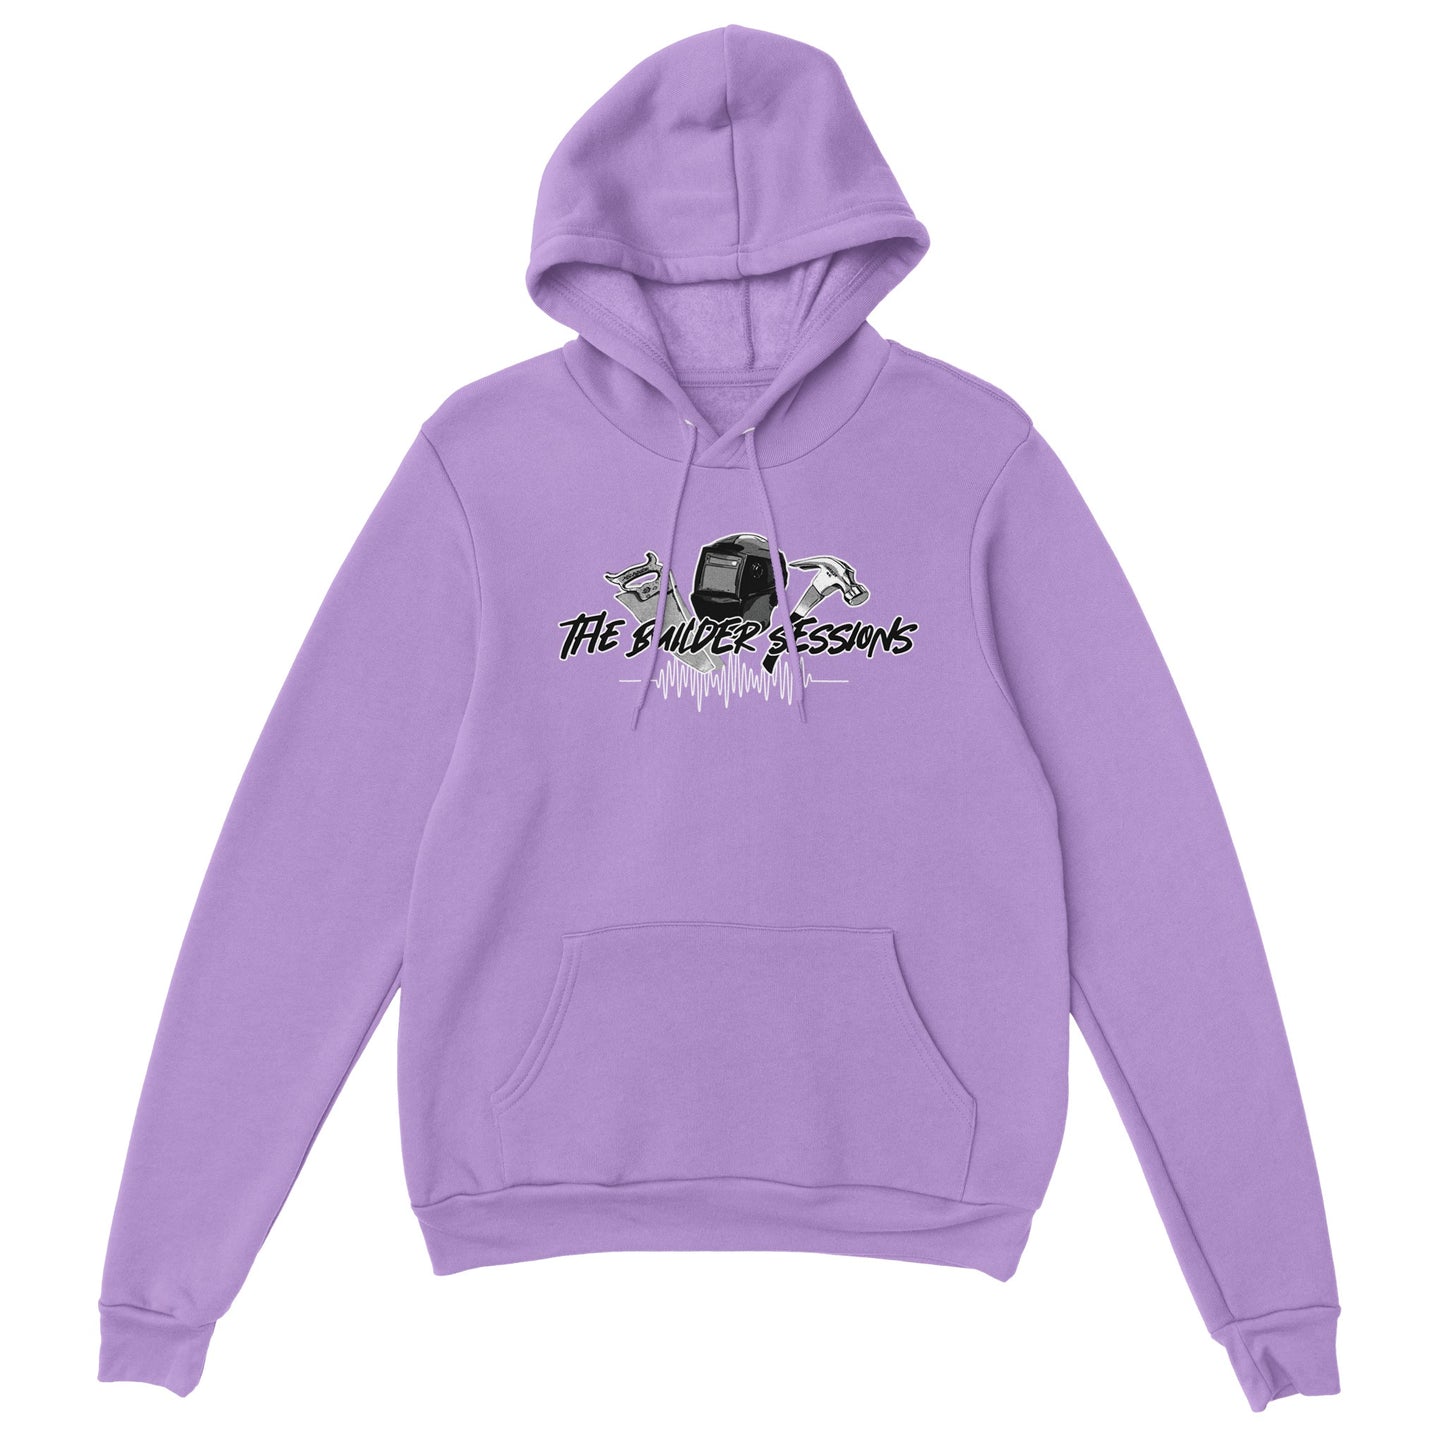 The Builder Sessions Pullover Hoodie